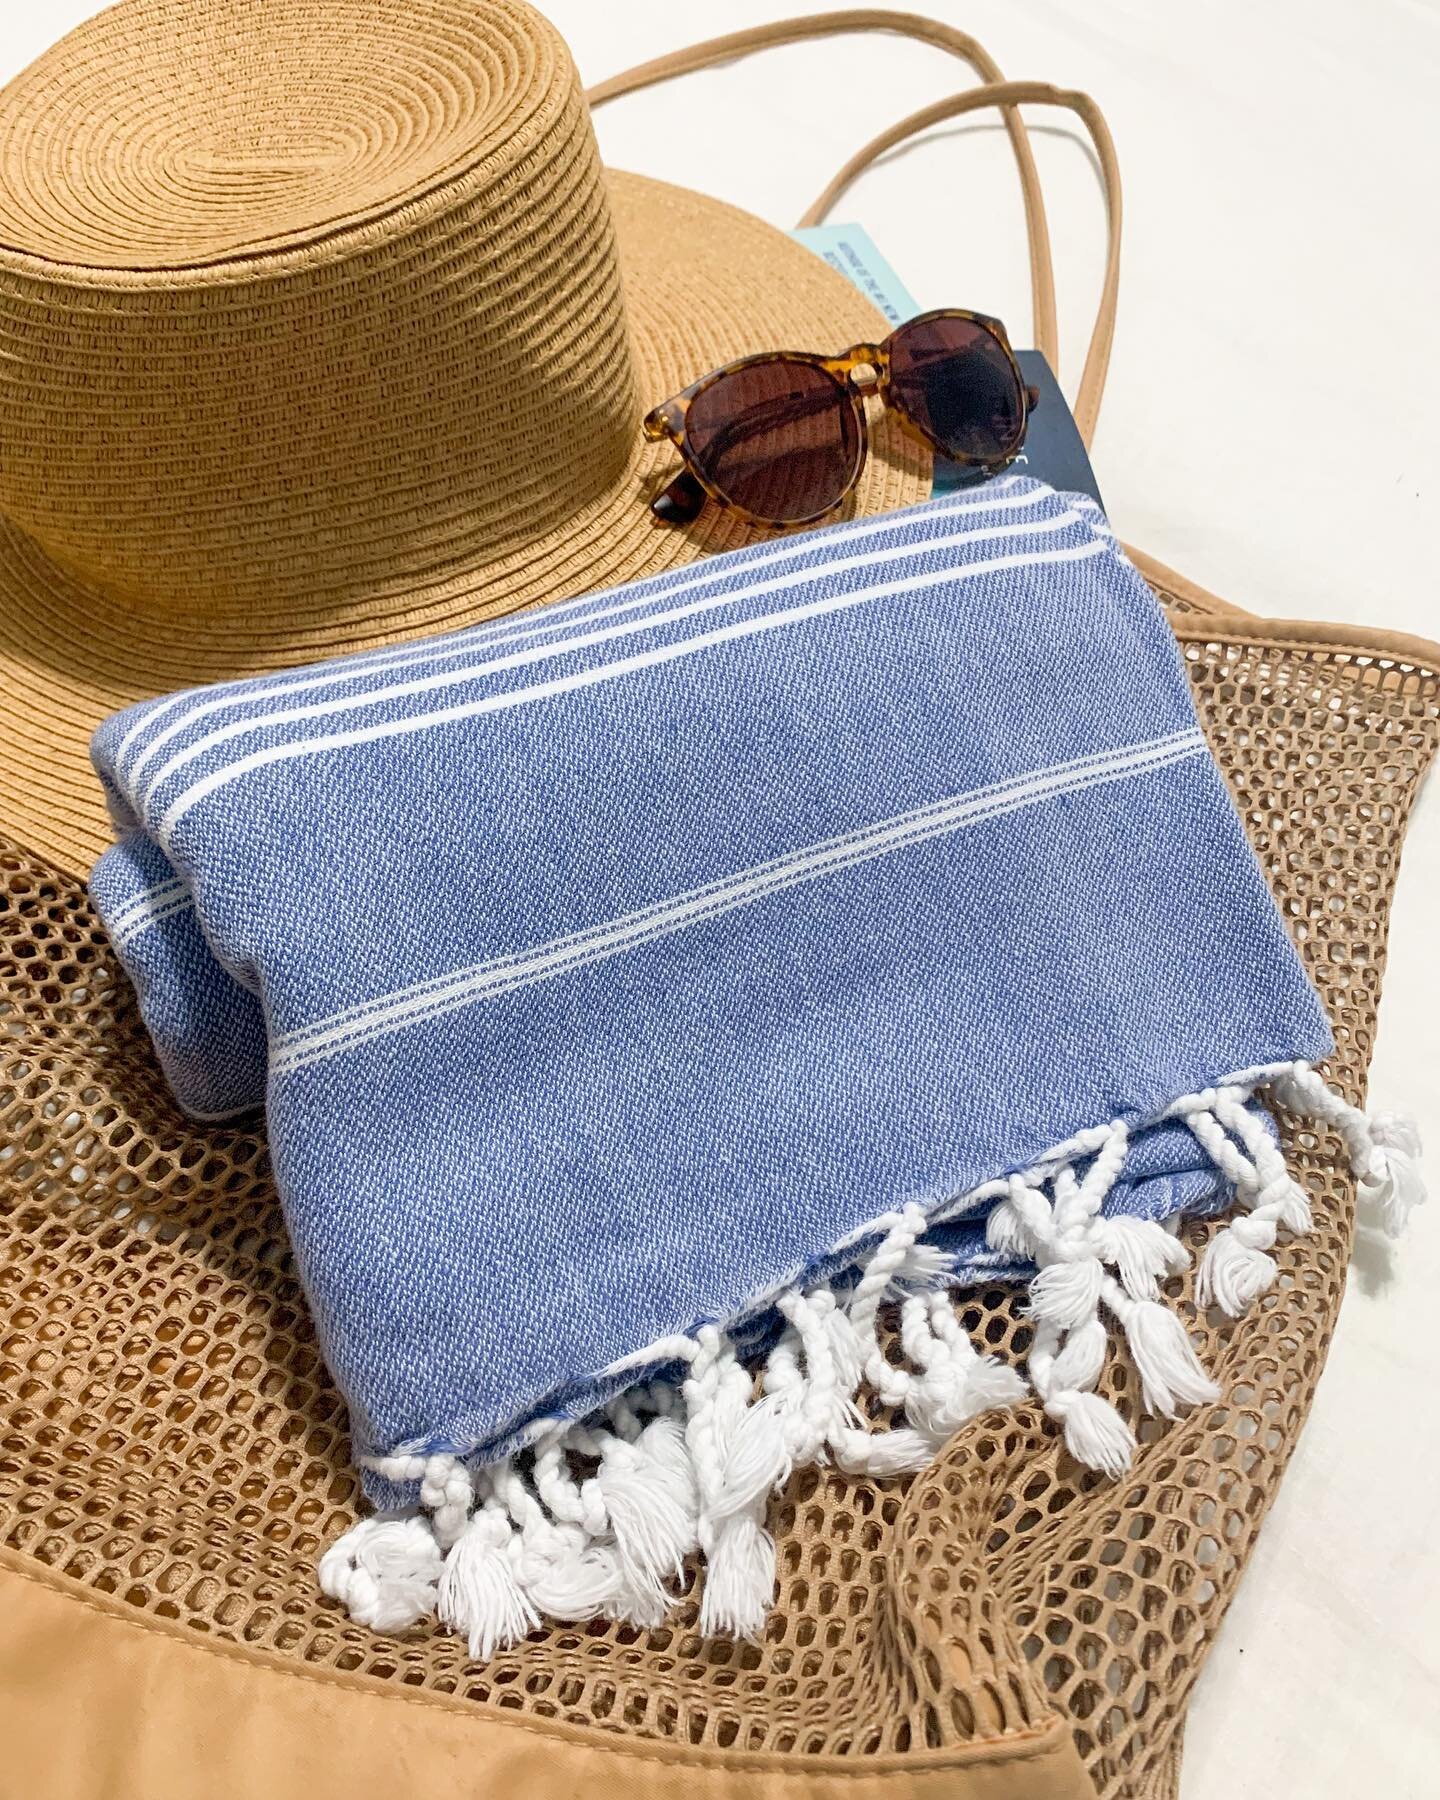 🌸 Mother's Day Gift Guide 🌸
Today's Gift Idea:  A Turkish towel from @ltswims 

This gift is perfect for the mom who loves the beach. We love this towel because (1) it dries so fast, (2) its impressively soft, and (3) its compact, which means that 